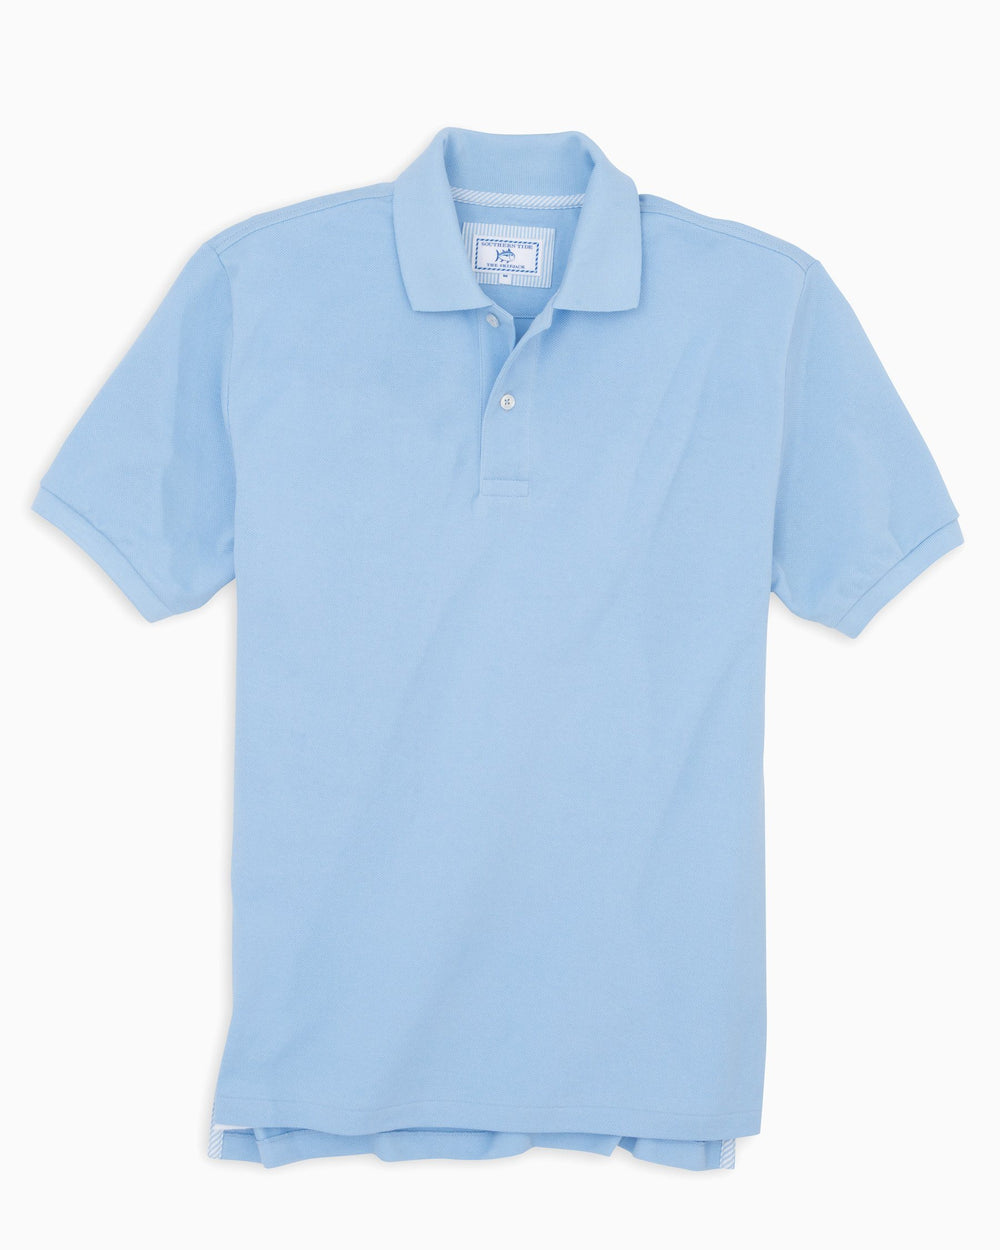 The front view of the Men's Light Blue Skipjack Gameday Colors Polo Shirt by Southern Tide - Tide Blue